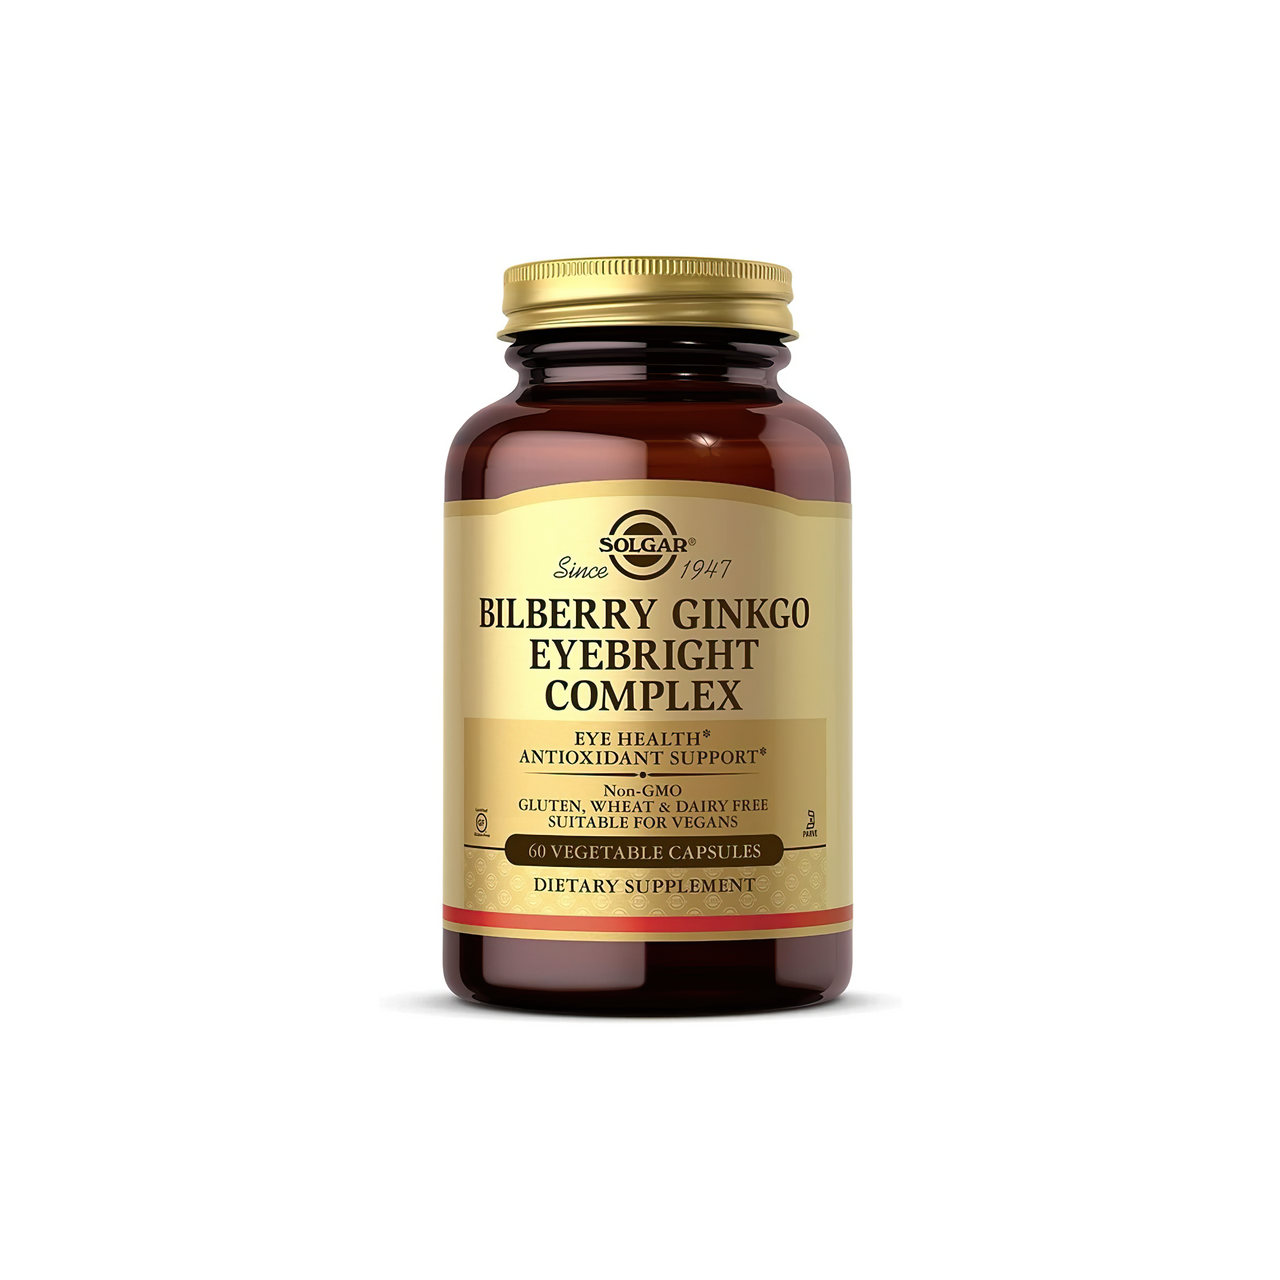 A dietary supplement bottle of Bilberry Ginkgo Eyebright Complex Plus Lutein from Solgar.